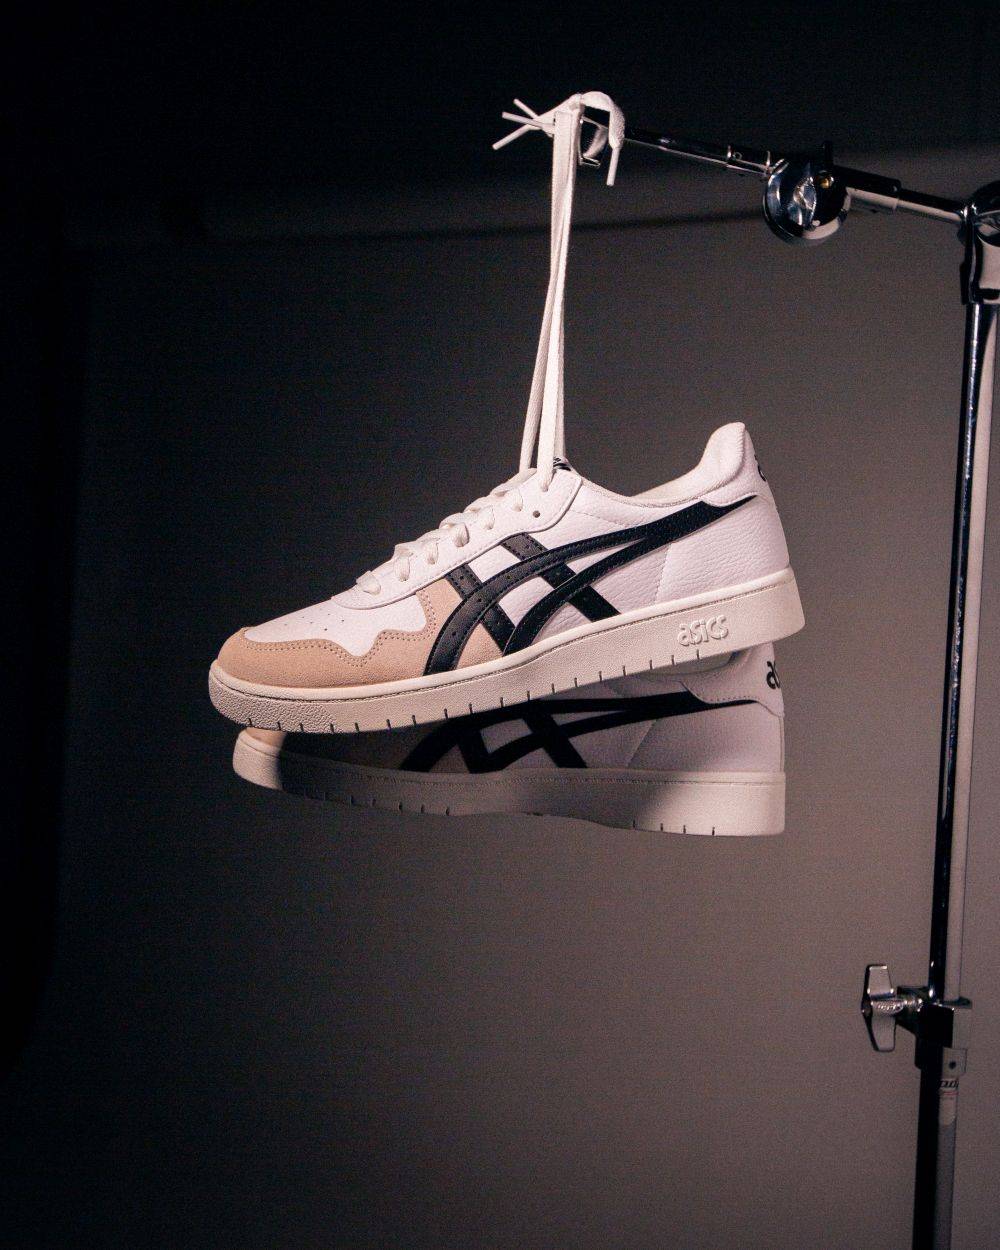 white asics hung from shoelaces